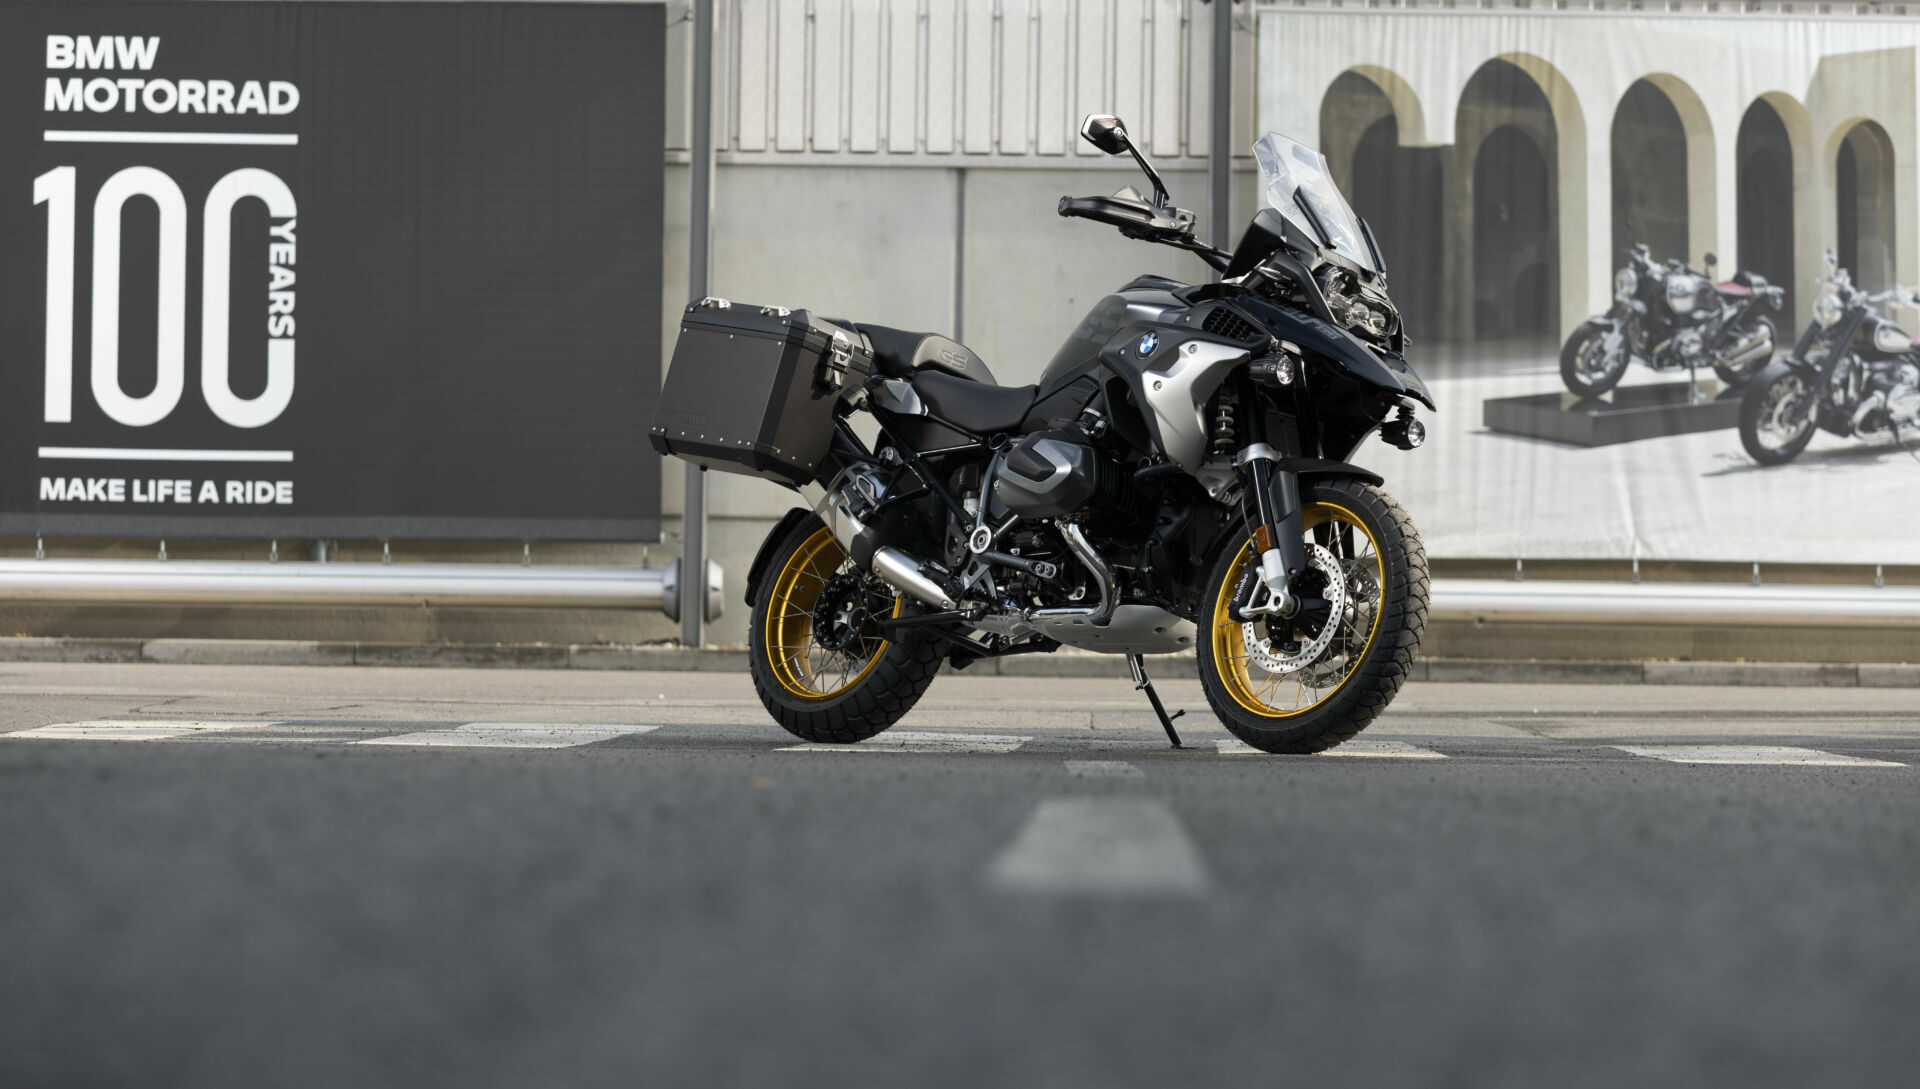 The one millionth BMW GS model with a Boxer engine. Photo courtesy BMW Motorrad.